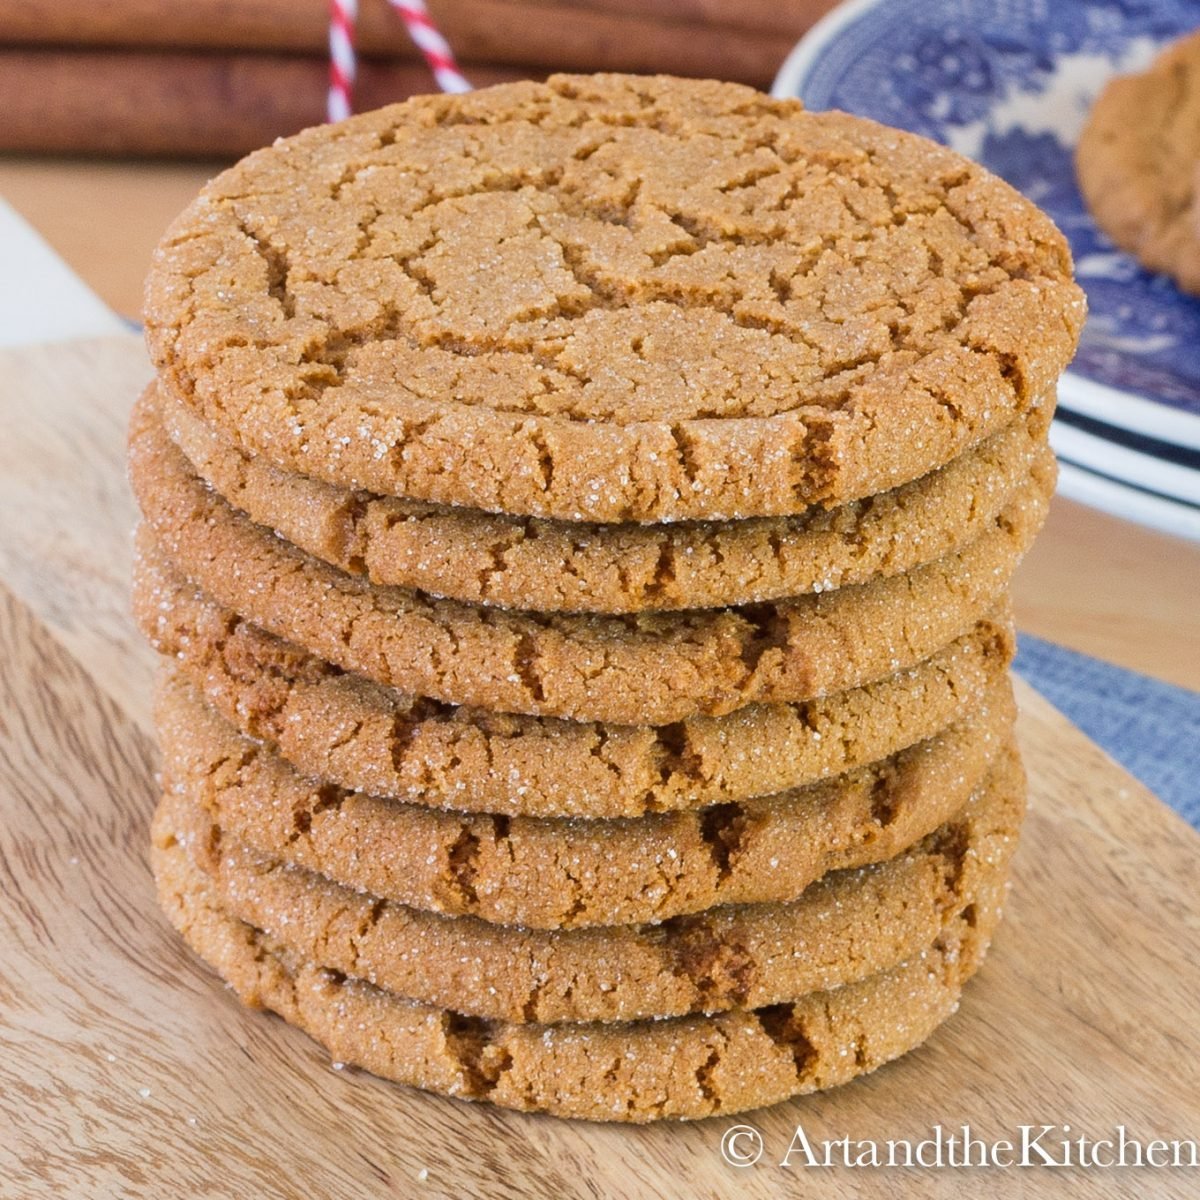 Stack of crispy ginger cookies on wood board